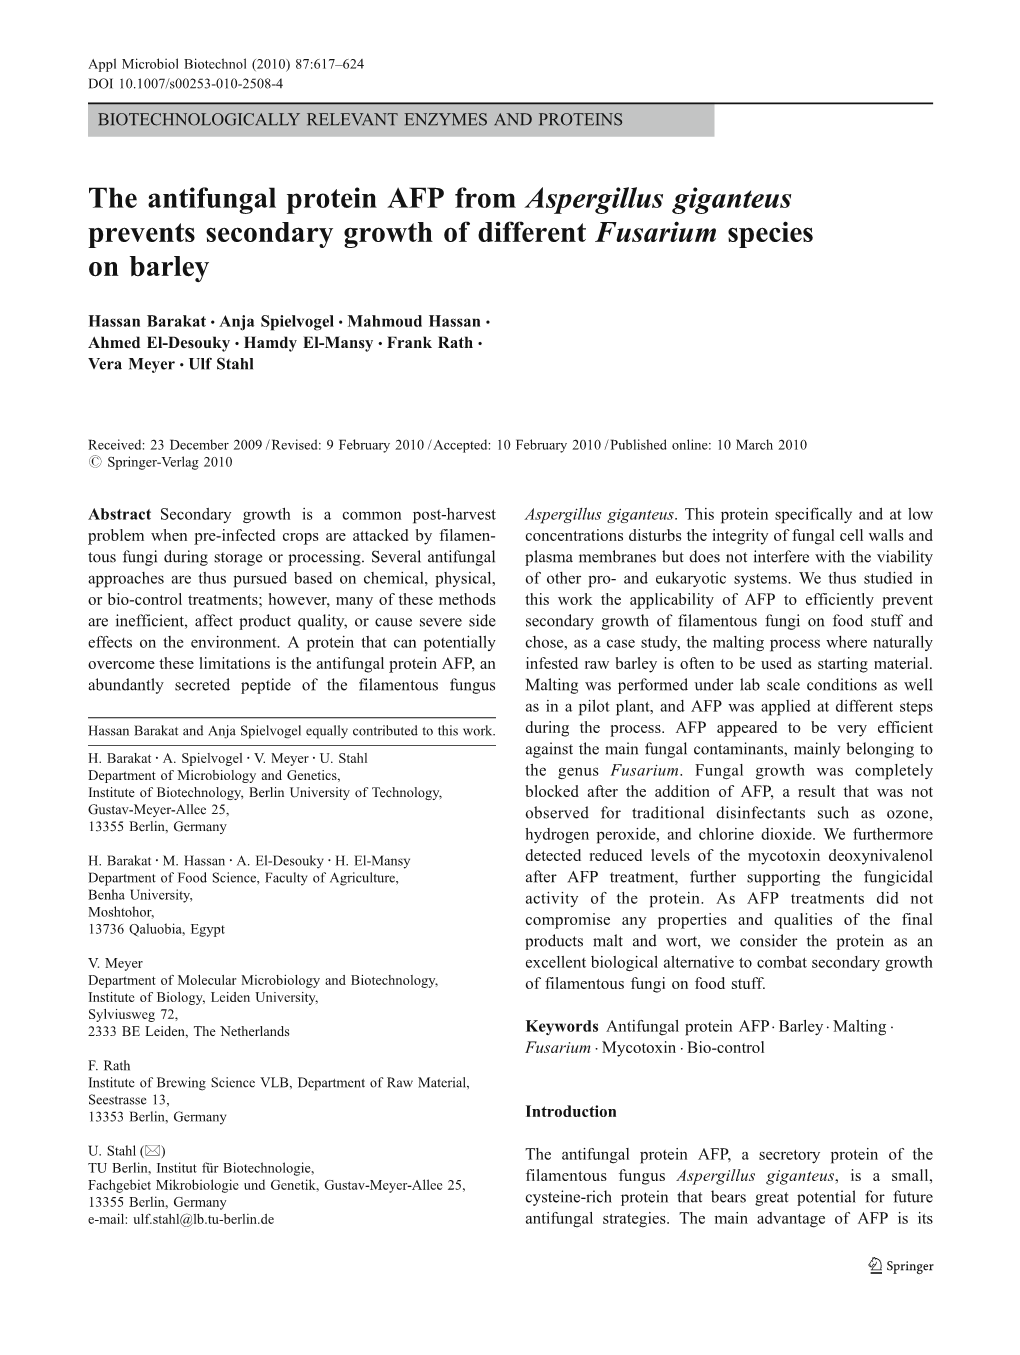 The Antifungal Protein AFP from Aspergillus Giganteus Prevents Secondary Growth of Different Fusarium Species on Barley